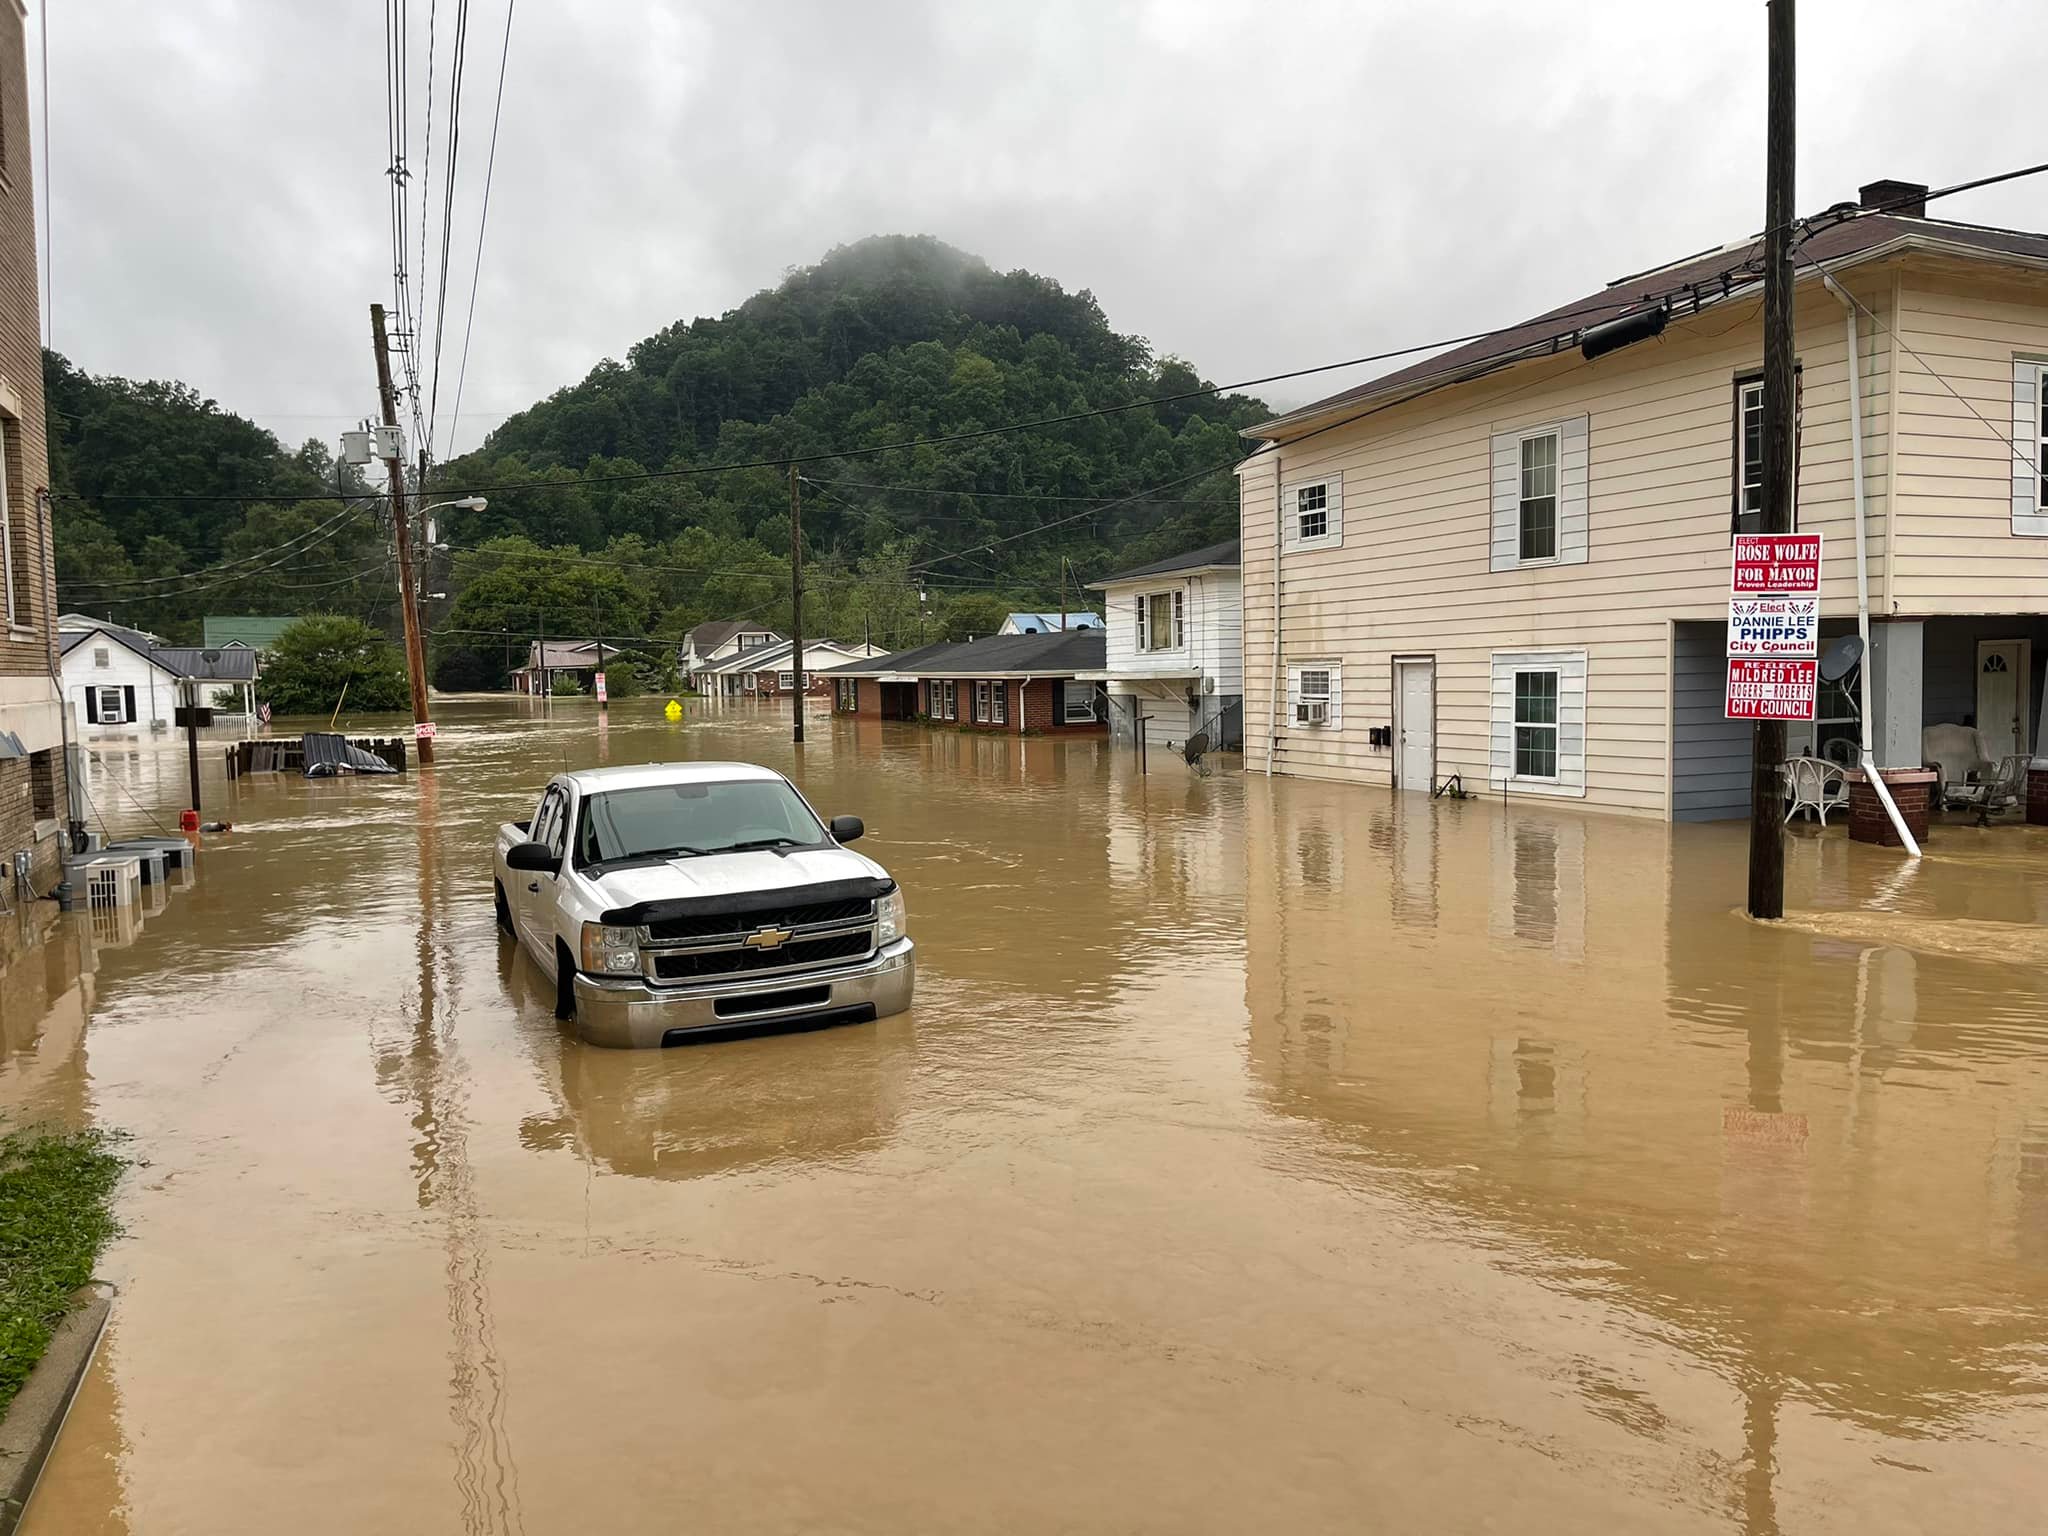 North Fork Kentucky River flooding buildings in southwest Jackson, KY